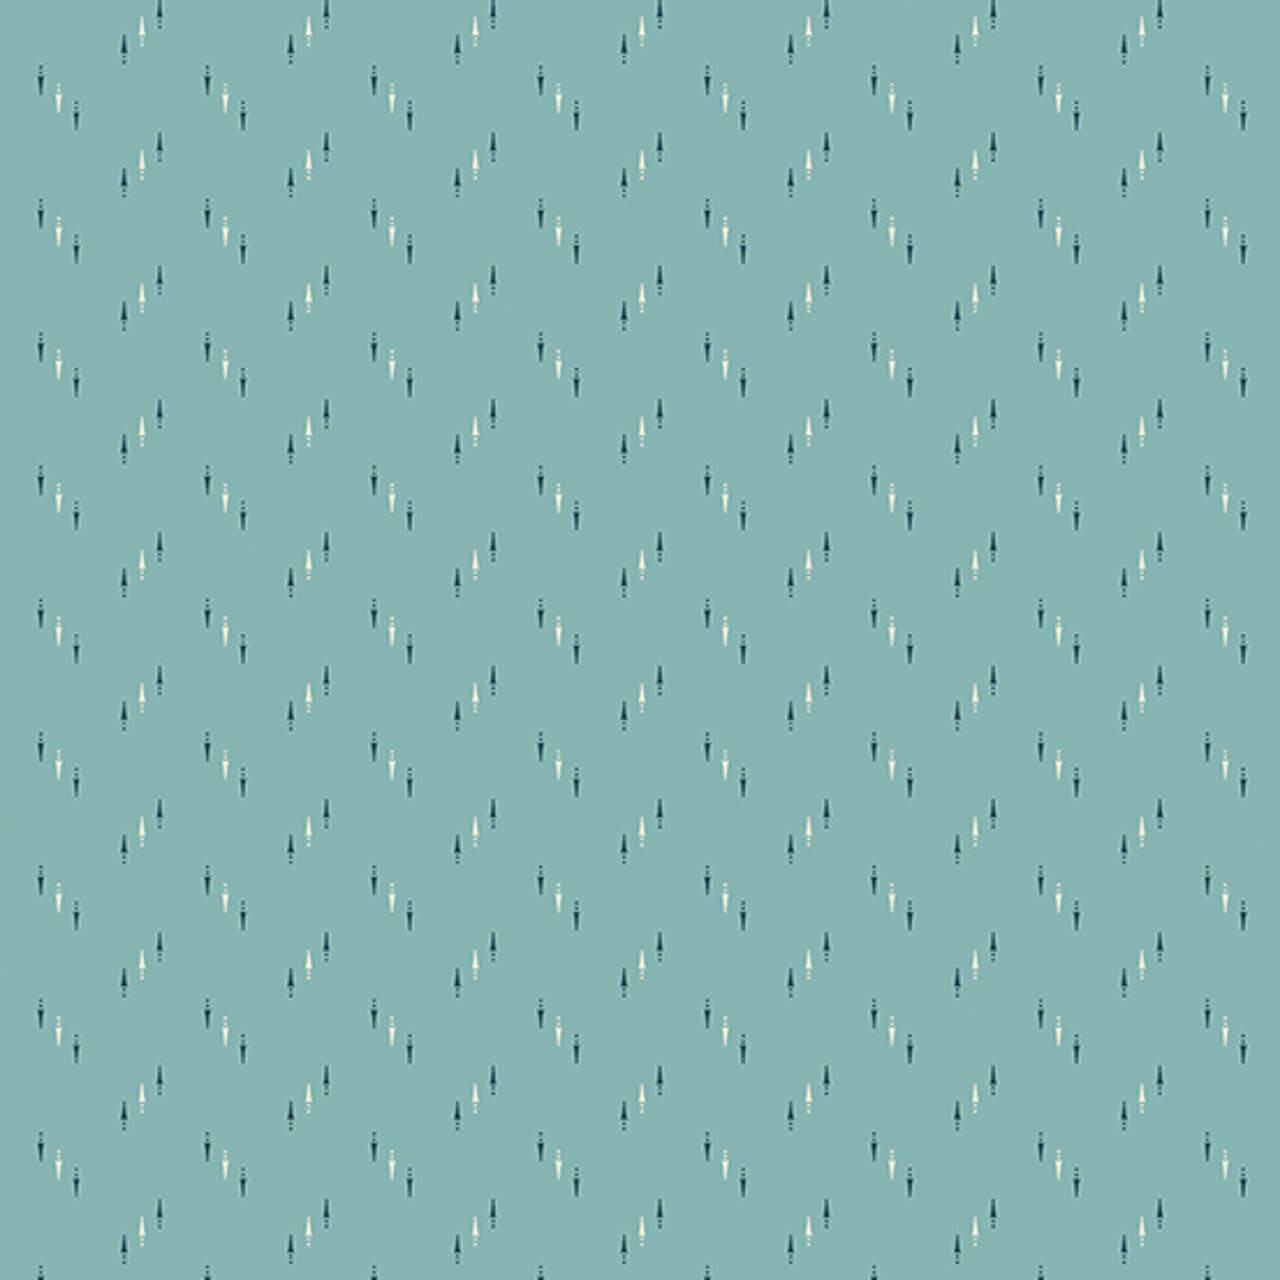 Andover's Arrowheads in Sky fabric featuring exquisite teal cotton with an arrowhead pattern